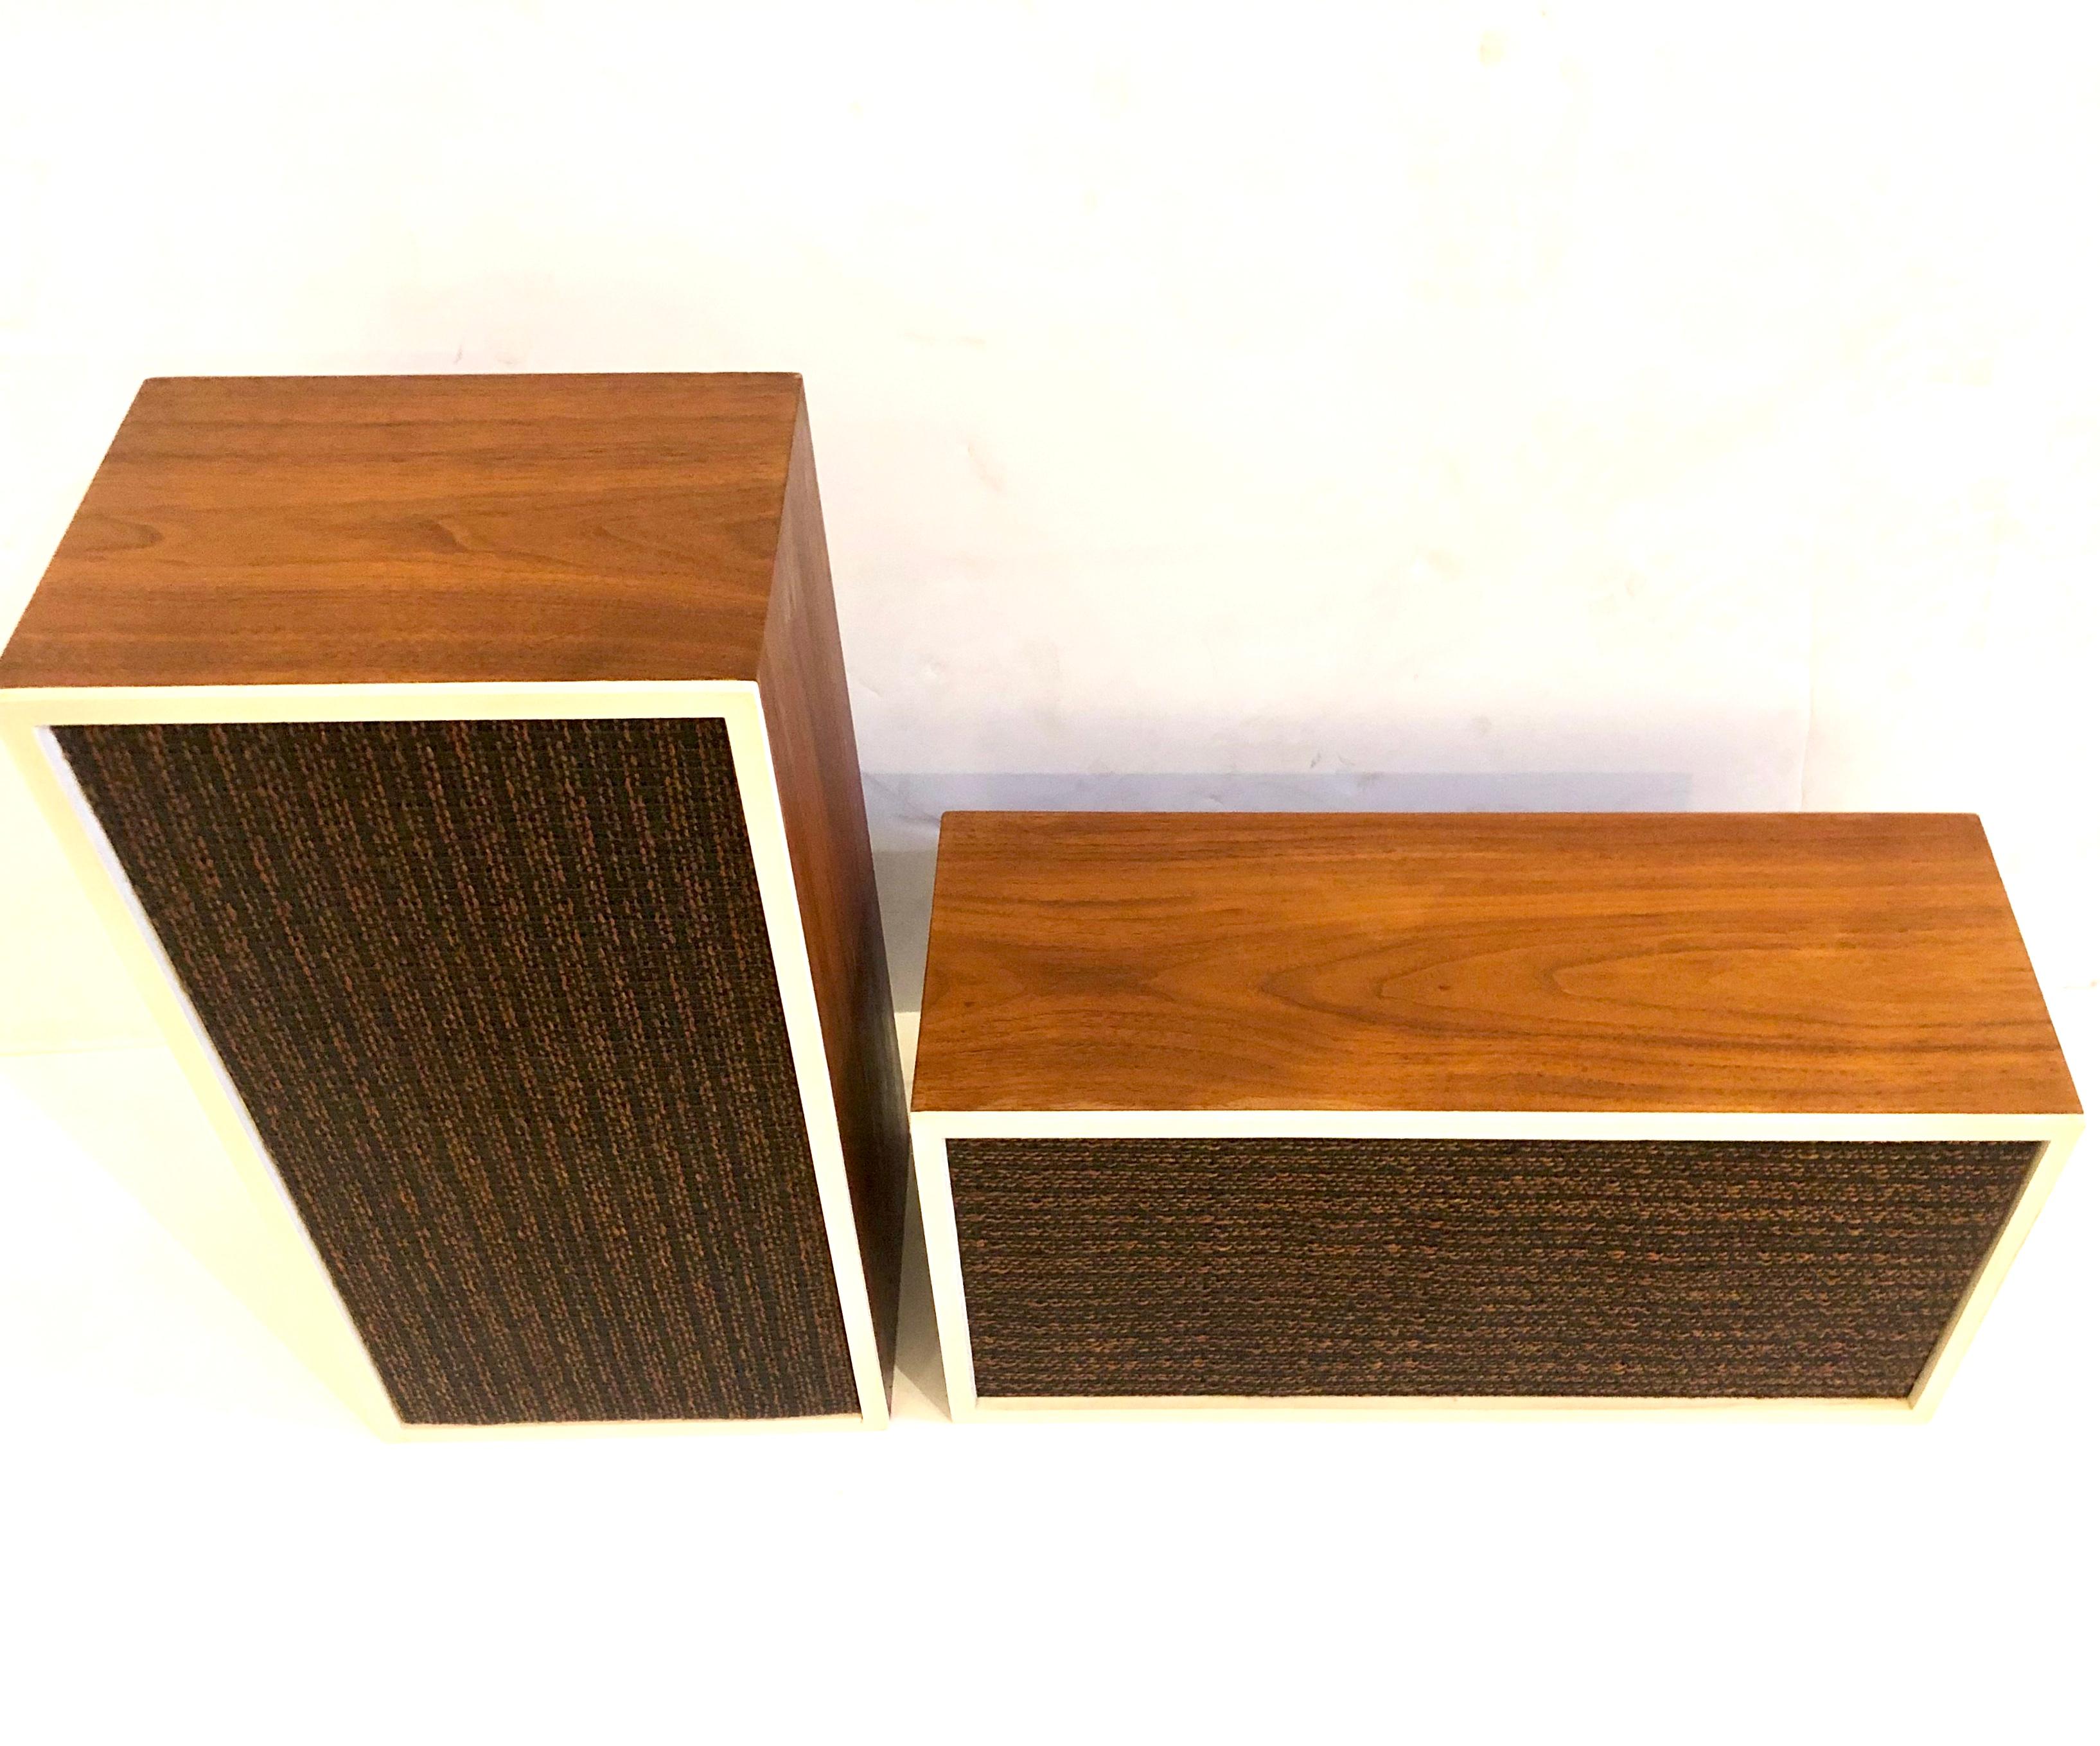 Great and rare pair on KLH speakers circa 1963 in great original condition produced by KHL only small production of these models were made, we have light sanded cleaned tested an oiled these simple but cool pair of speakers.